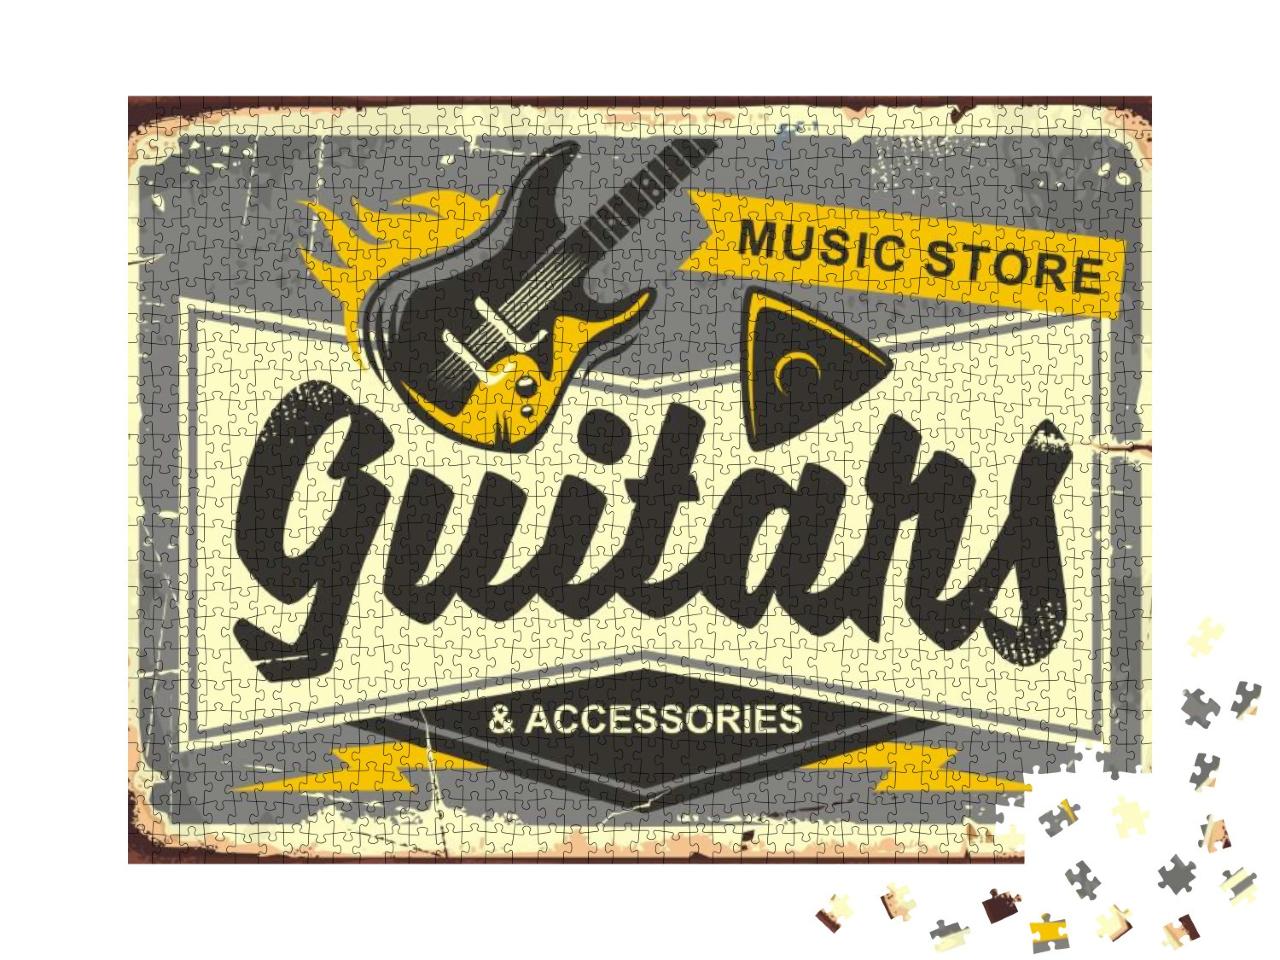 Guitar Store Retro Advertisement Sign Board with Electric... Jigsaw Puzzle with 1000 pieces